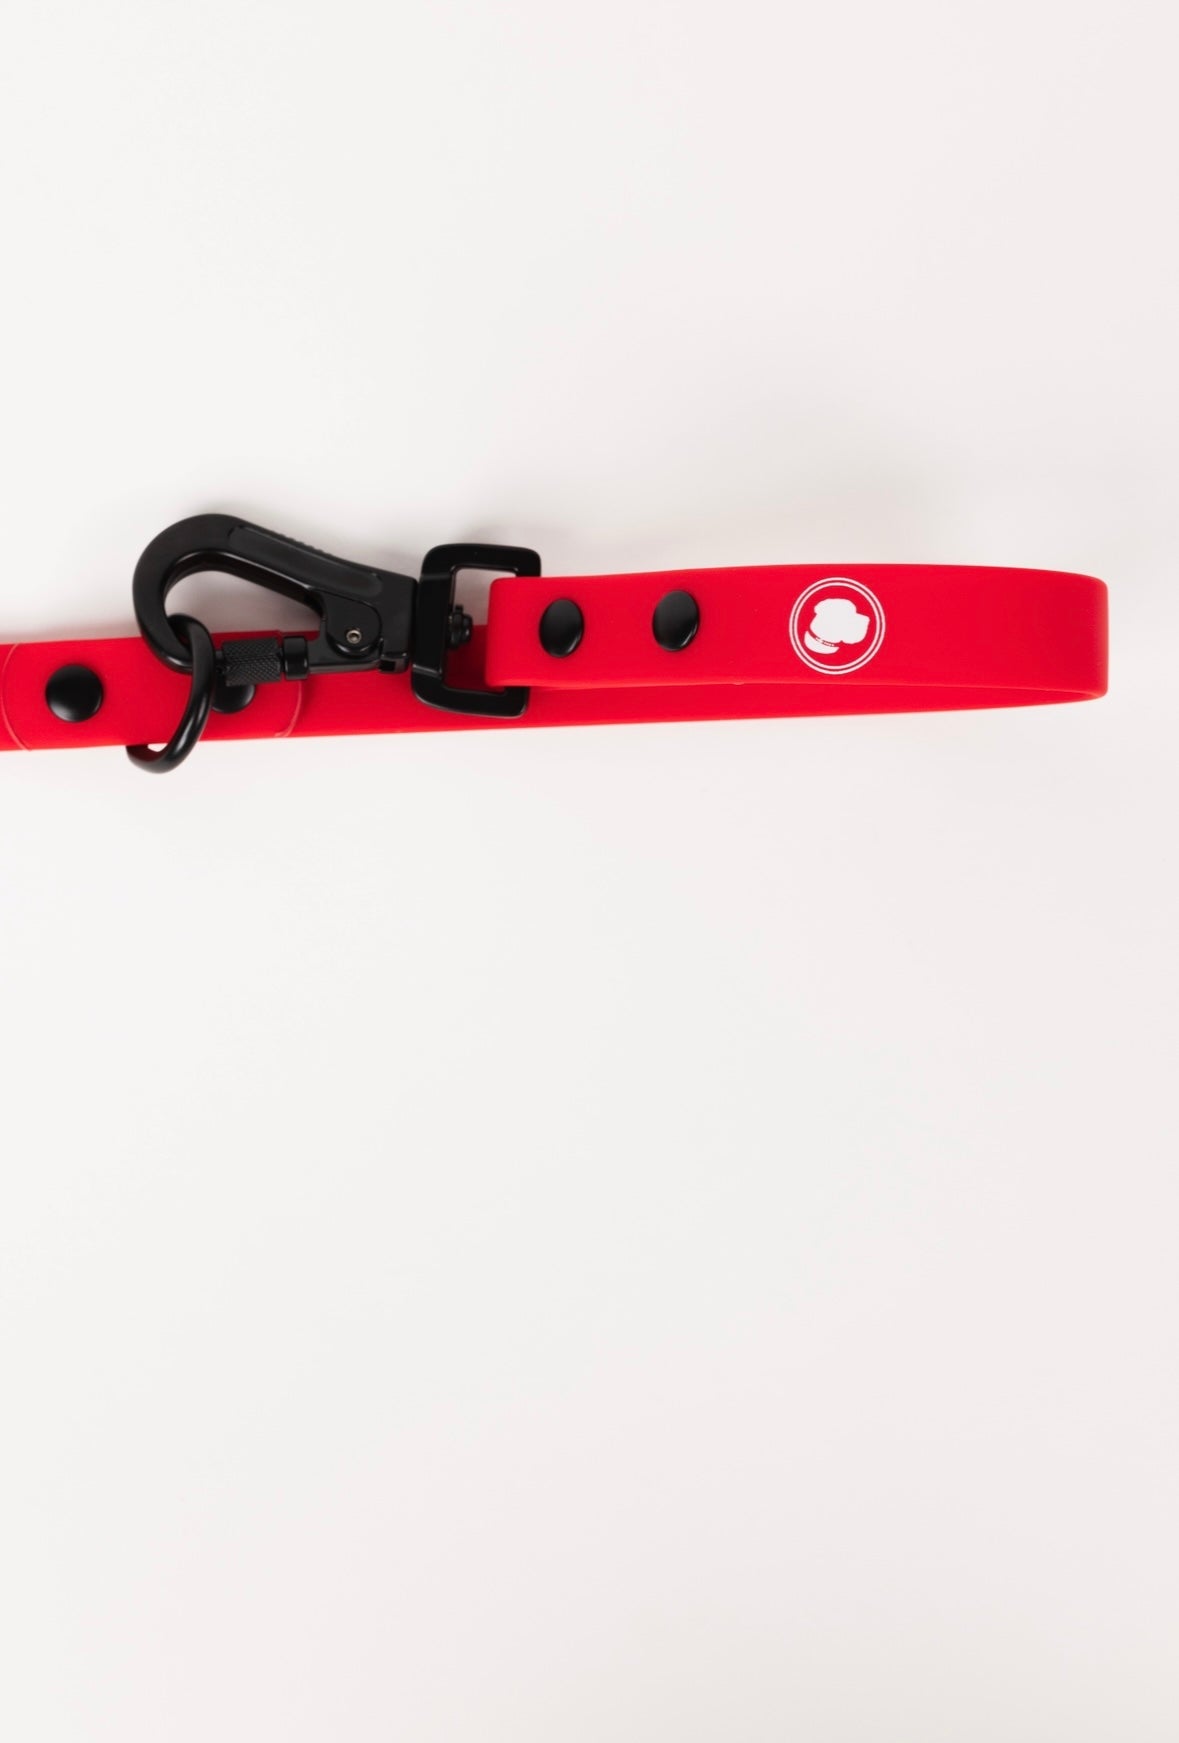 The Modern Dog Company - Ruby Red Adjustable Leash